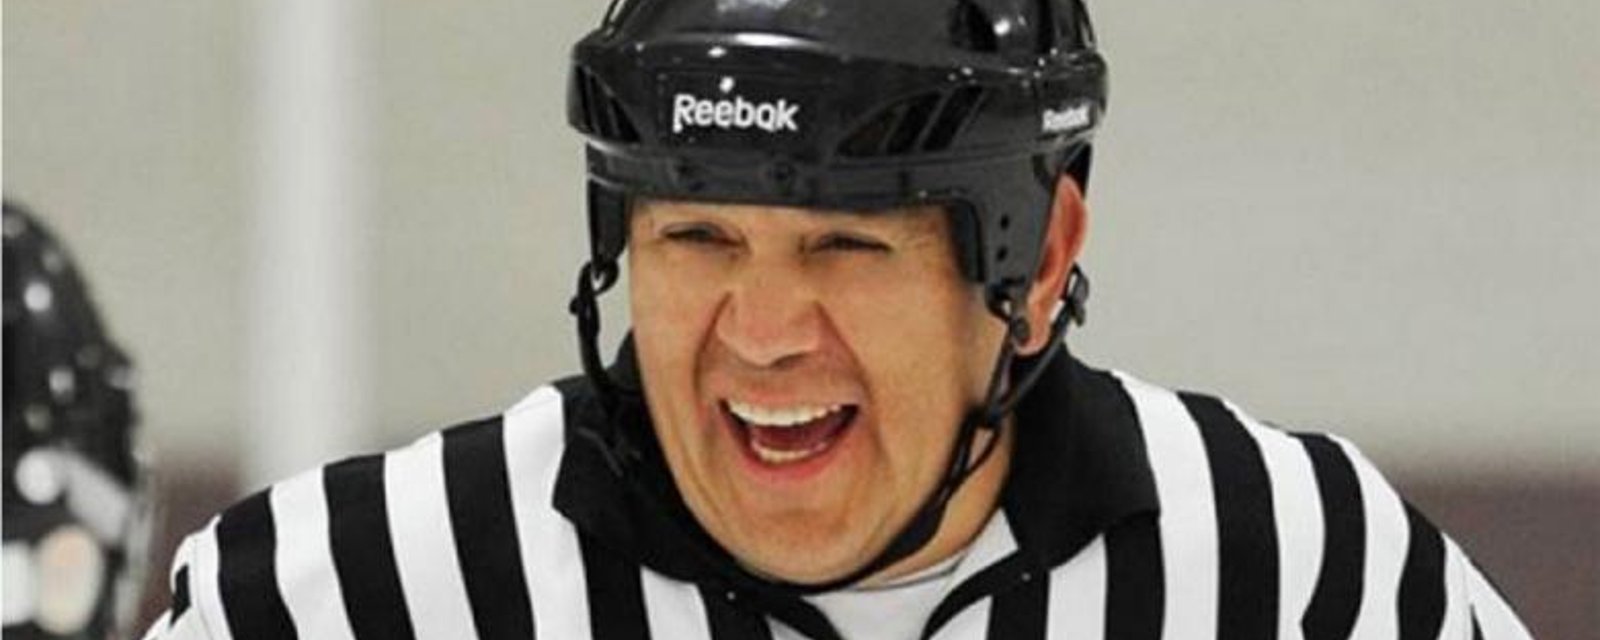 Referee dies after suffering on ice injury. 